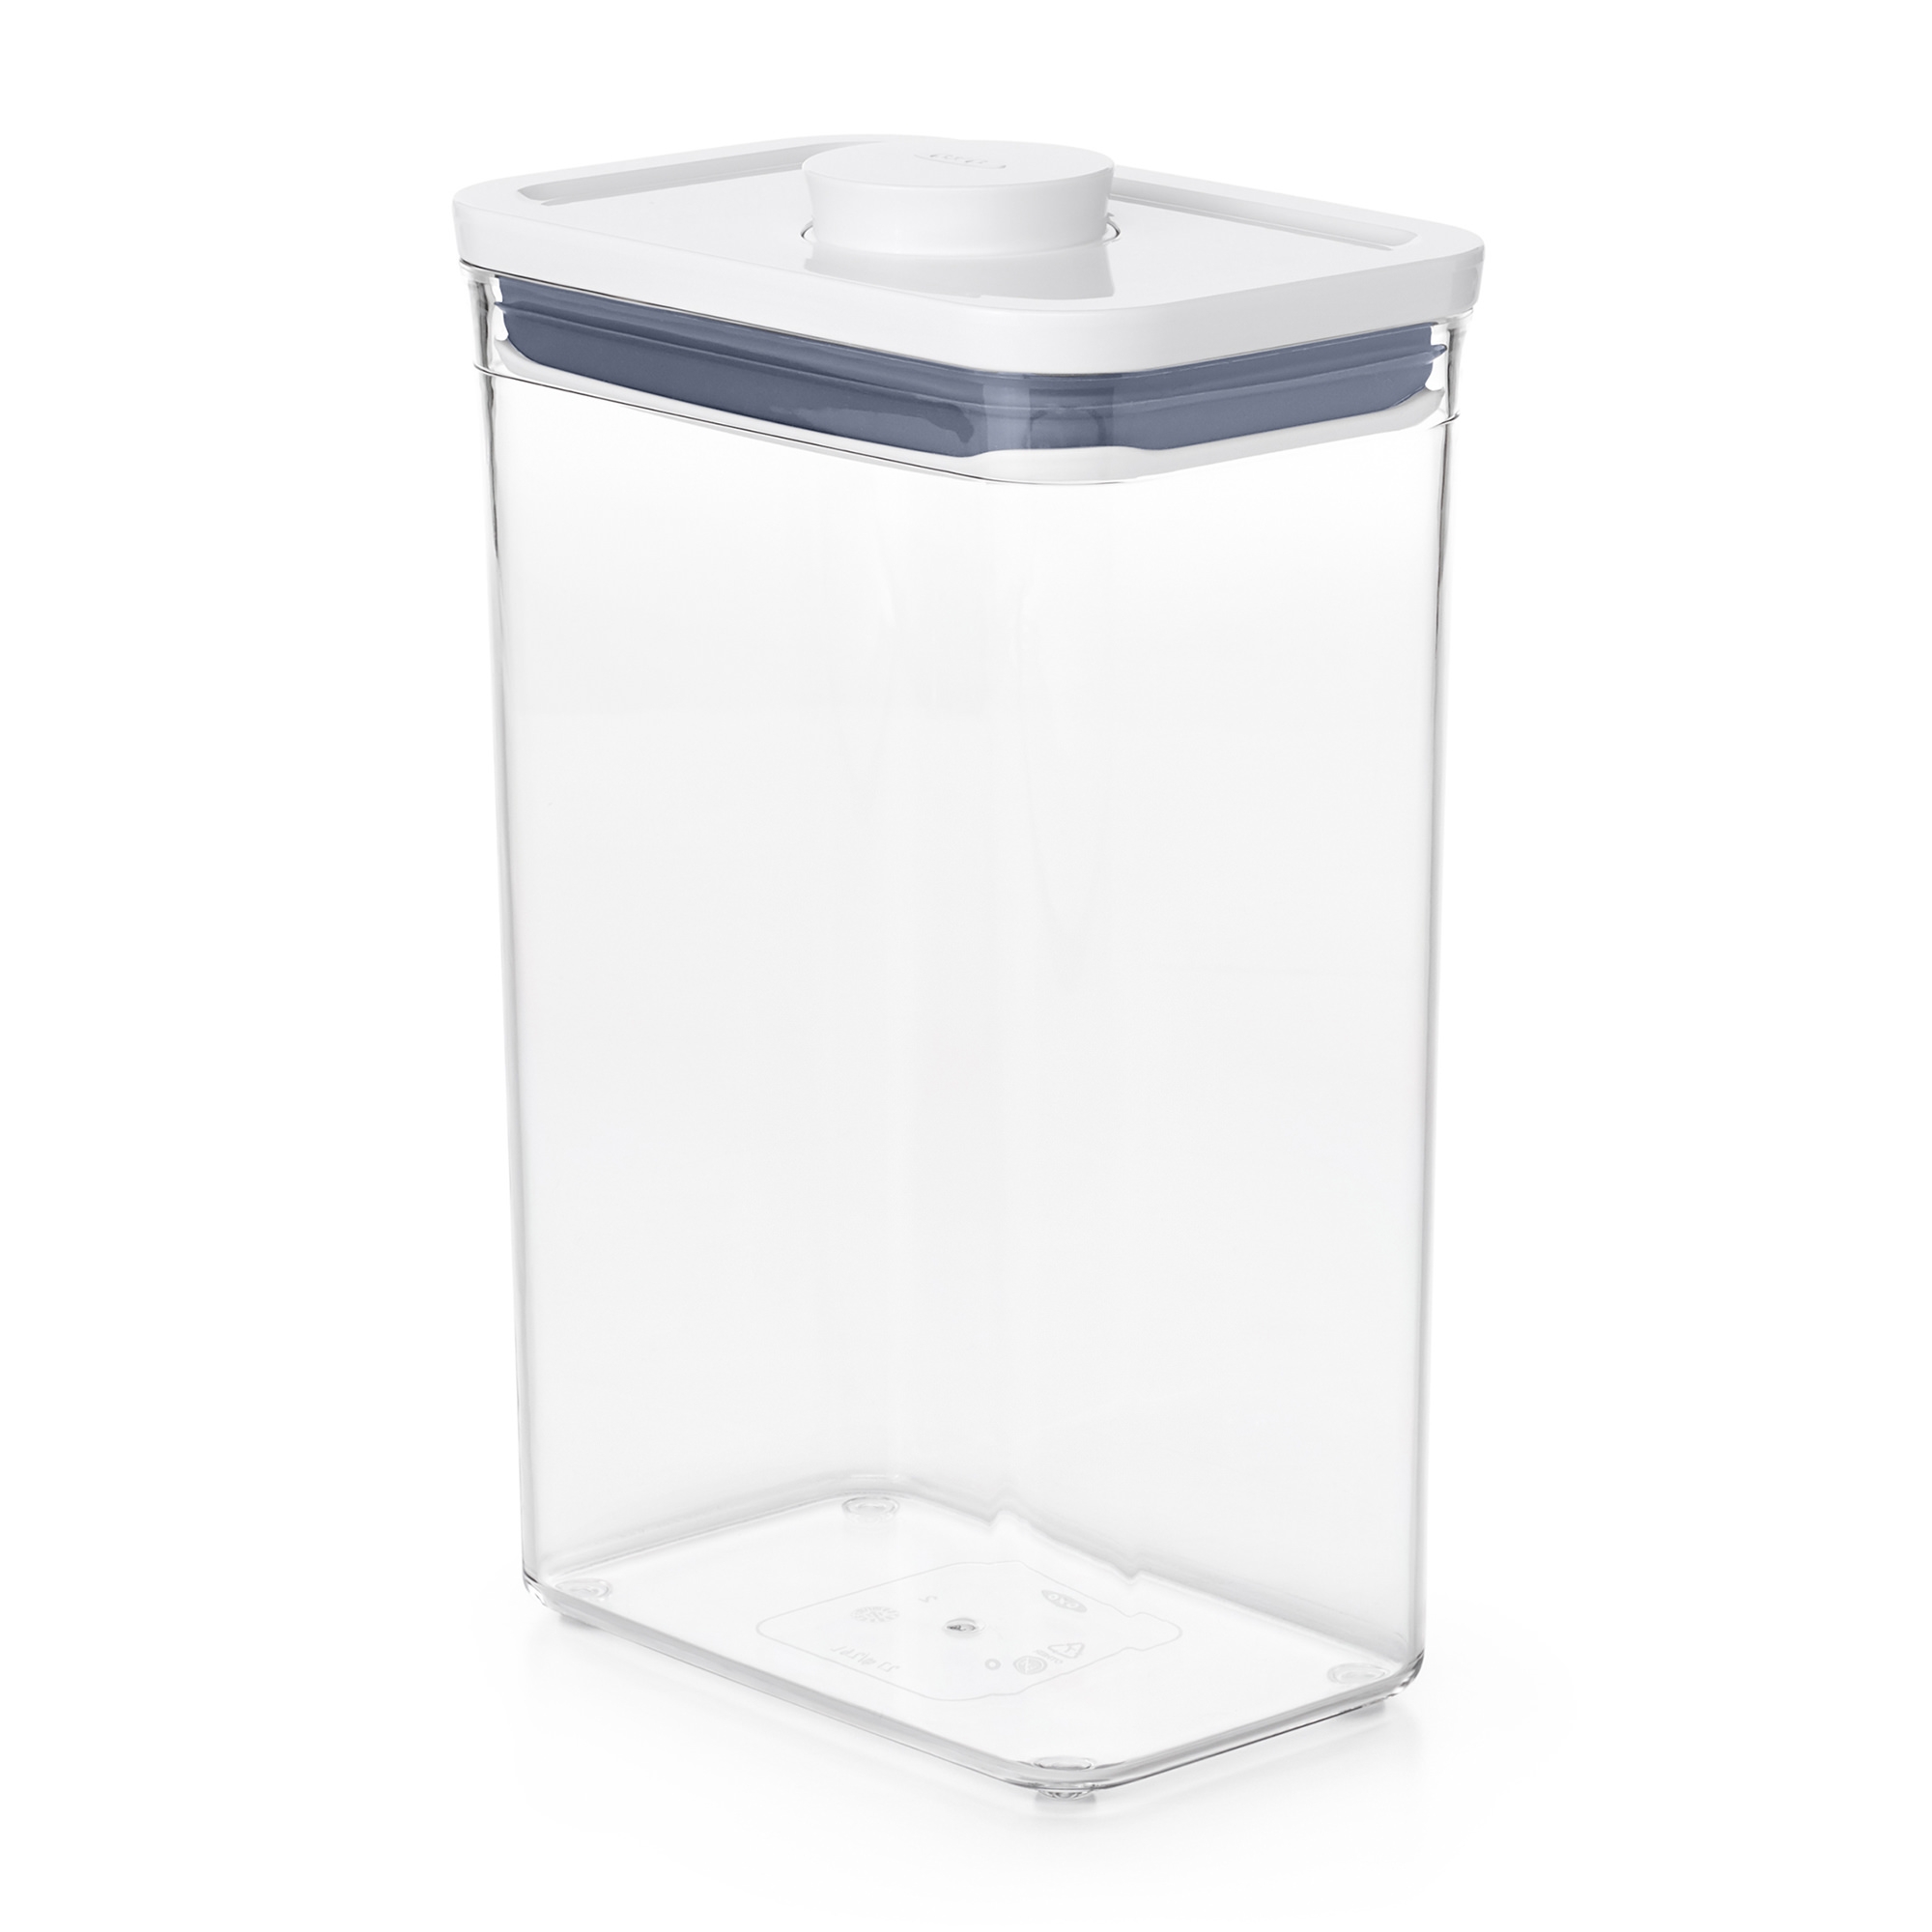 OXO Good Grips Rectangular Pop 2.0 Container 2.6L Image 2